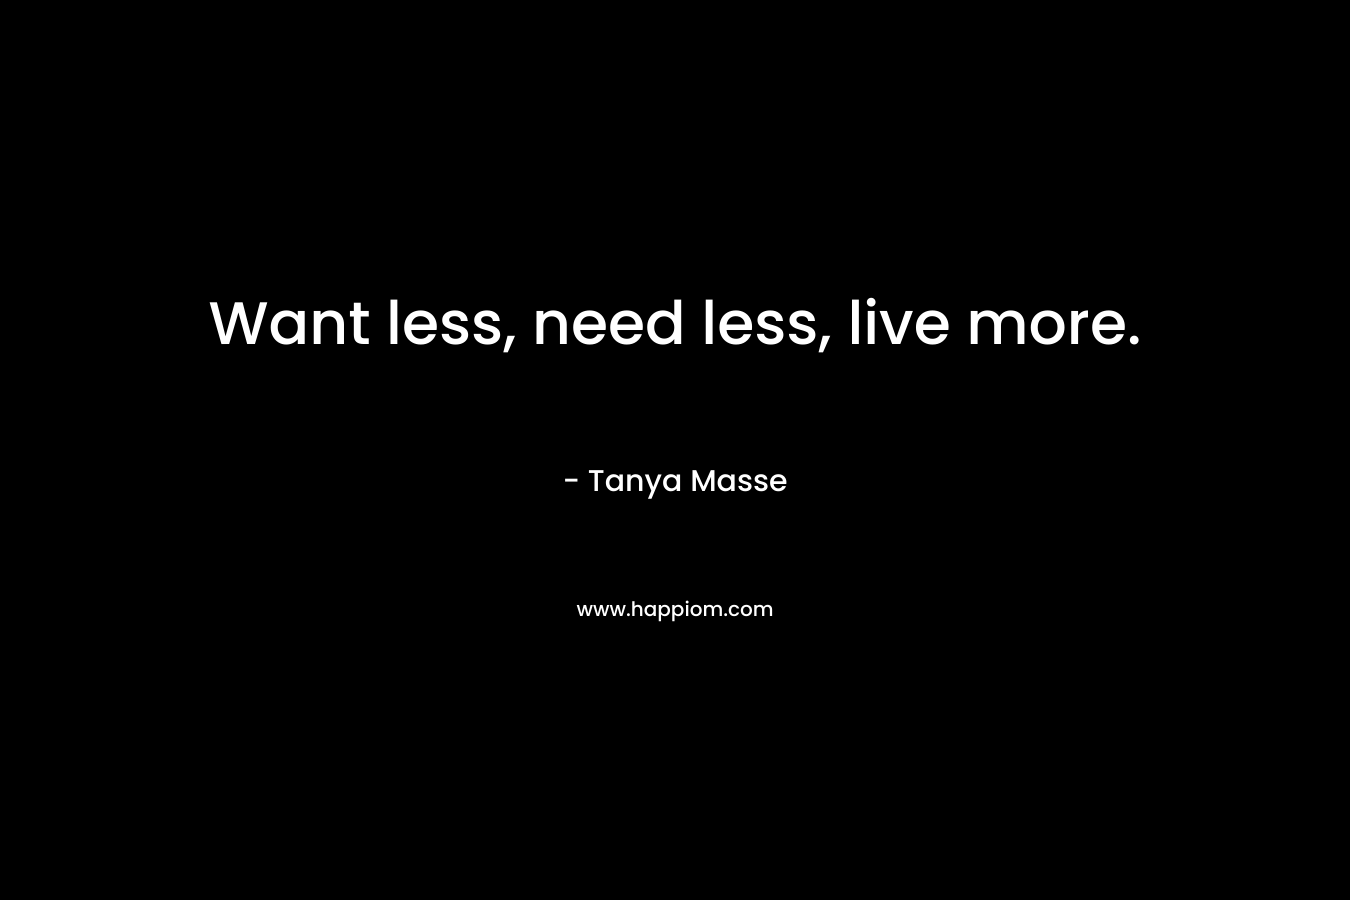 Want less, need less, live more.